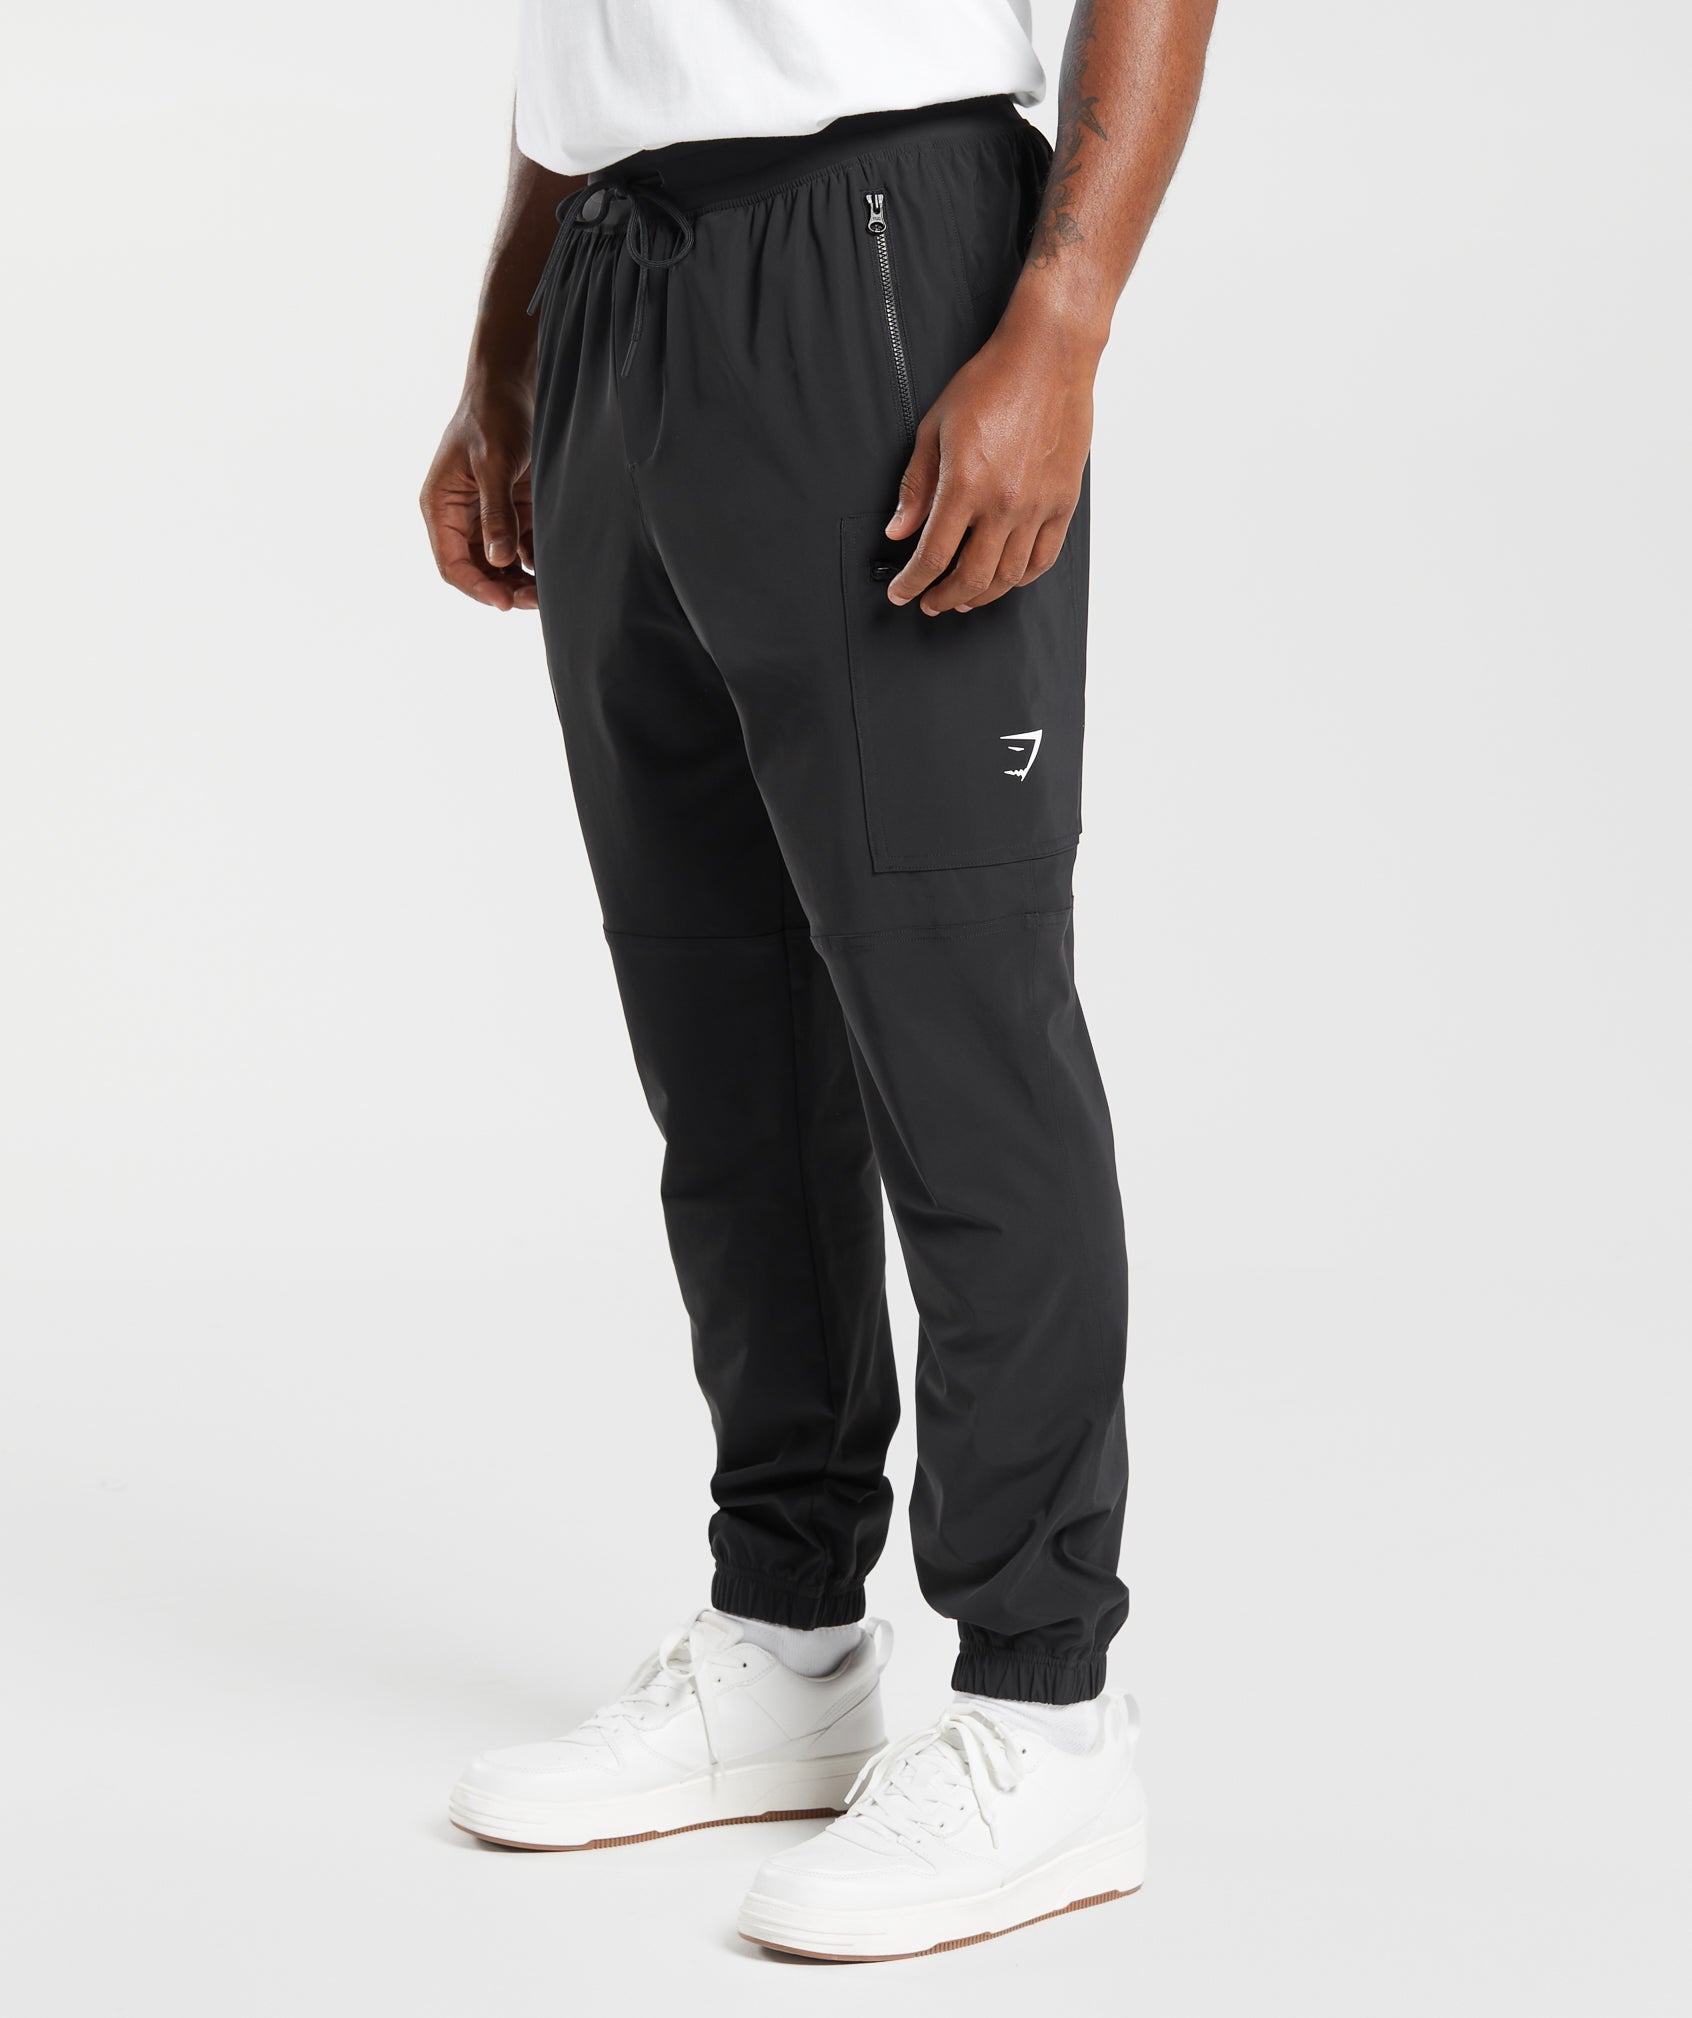 Rest Day Cargo Pants in Black - view 3